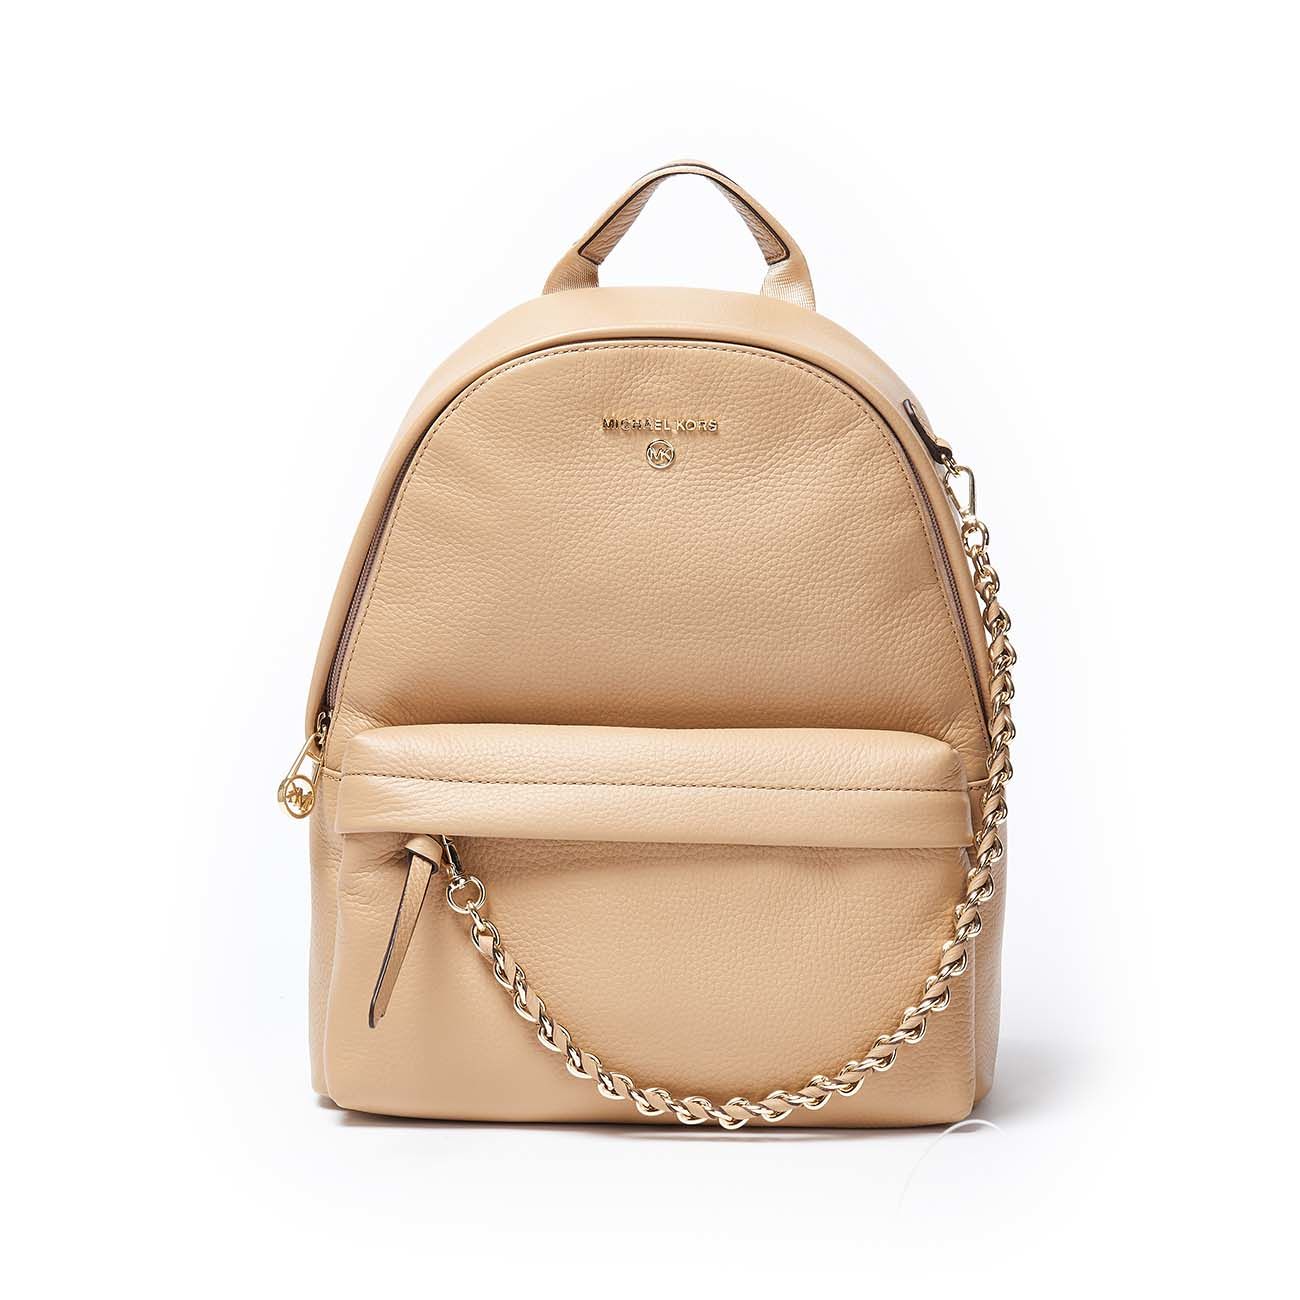 MICHAEL KORS SLATER PEBBLED LEATHER BACKPACK WITH GOLD CHAIN Woman Camel |  Mascheroni Store